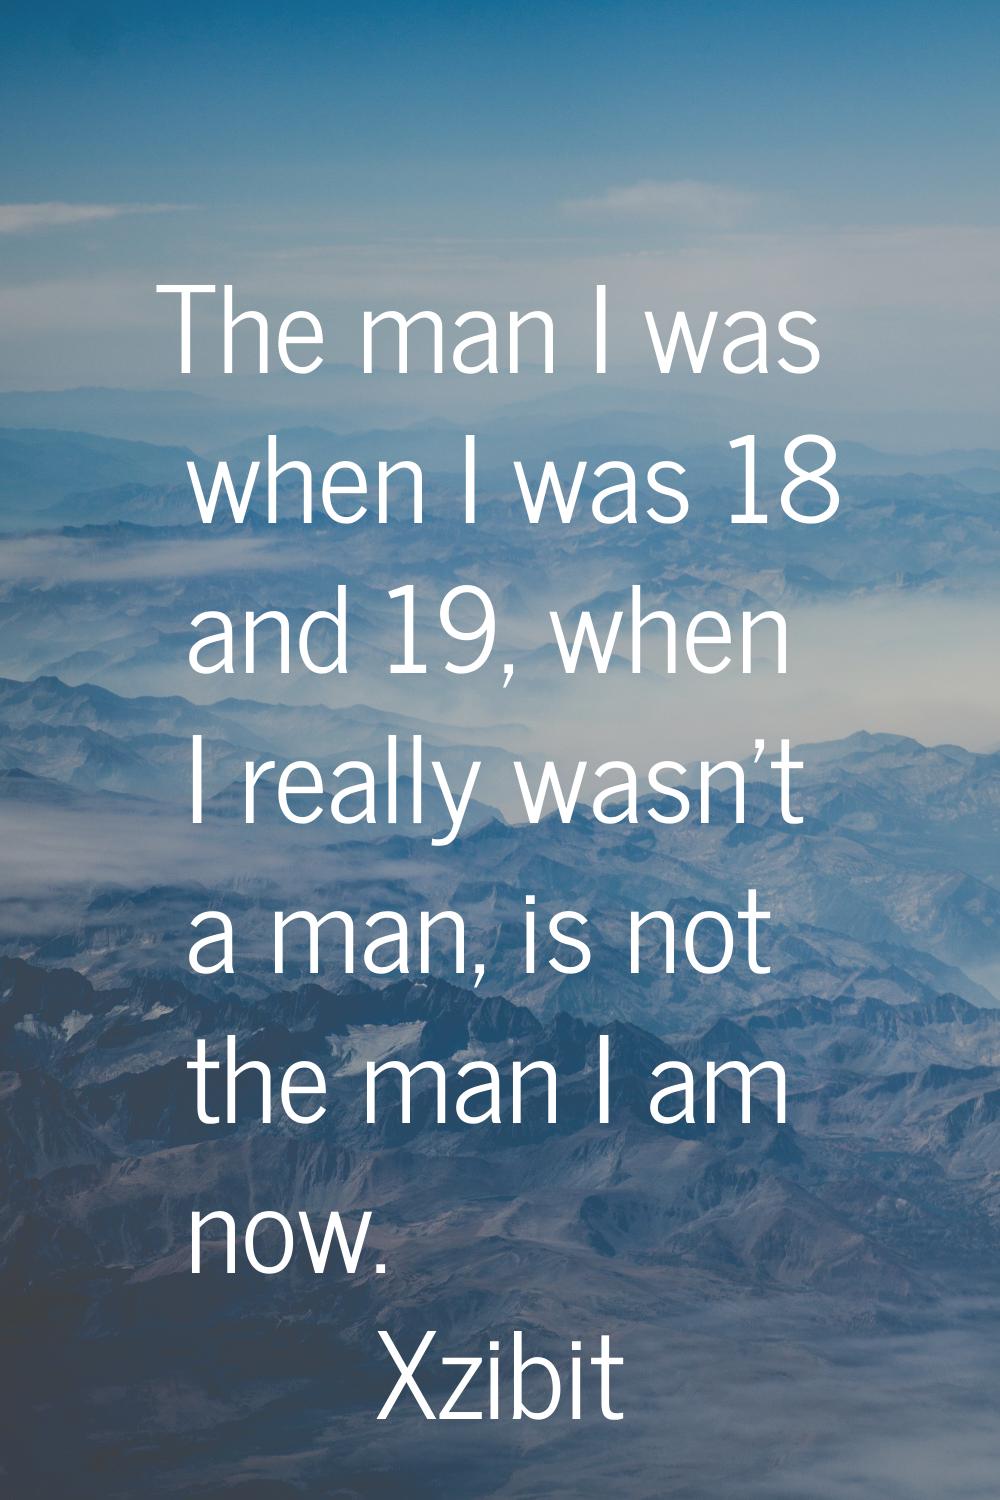 The man I was when I was 18 and 19, when I really wasn't a man, is not the man I am now.